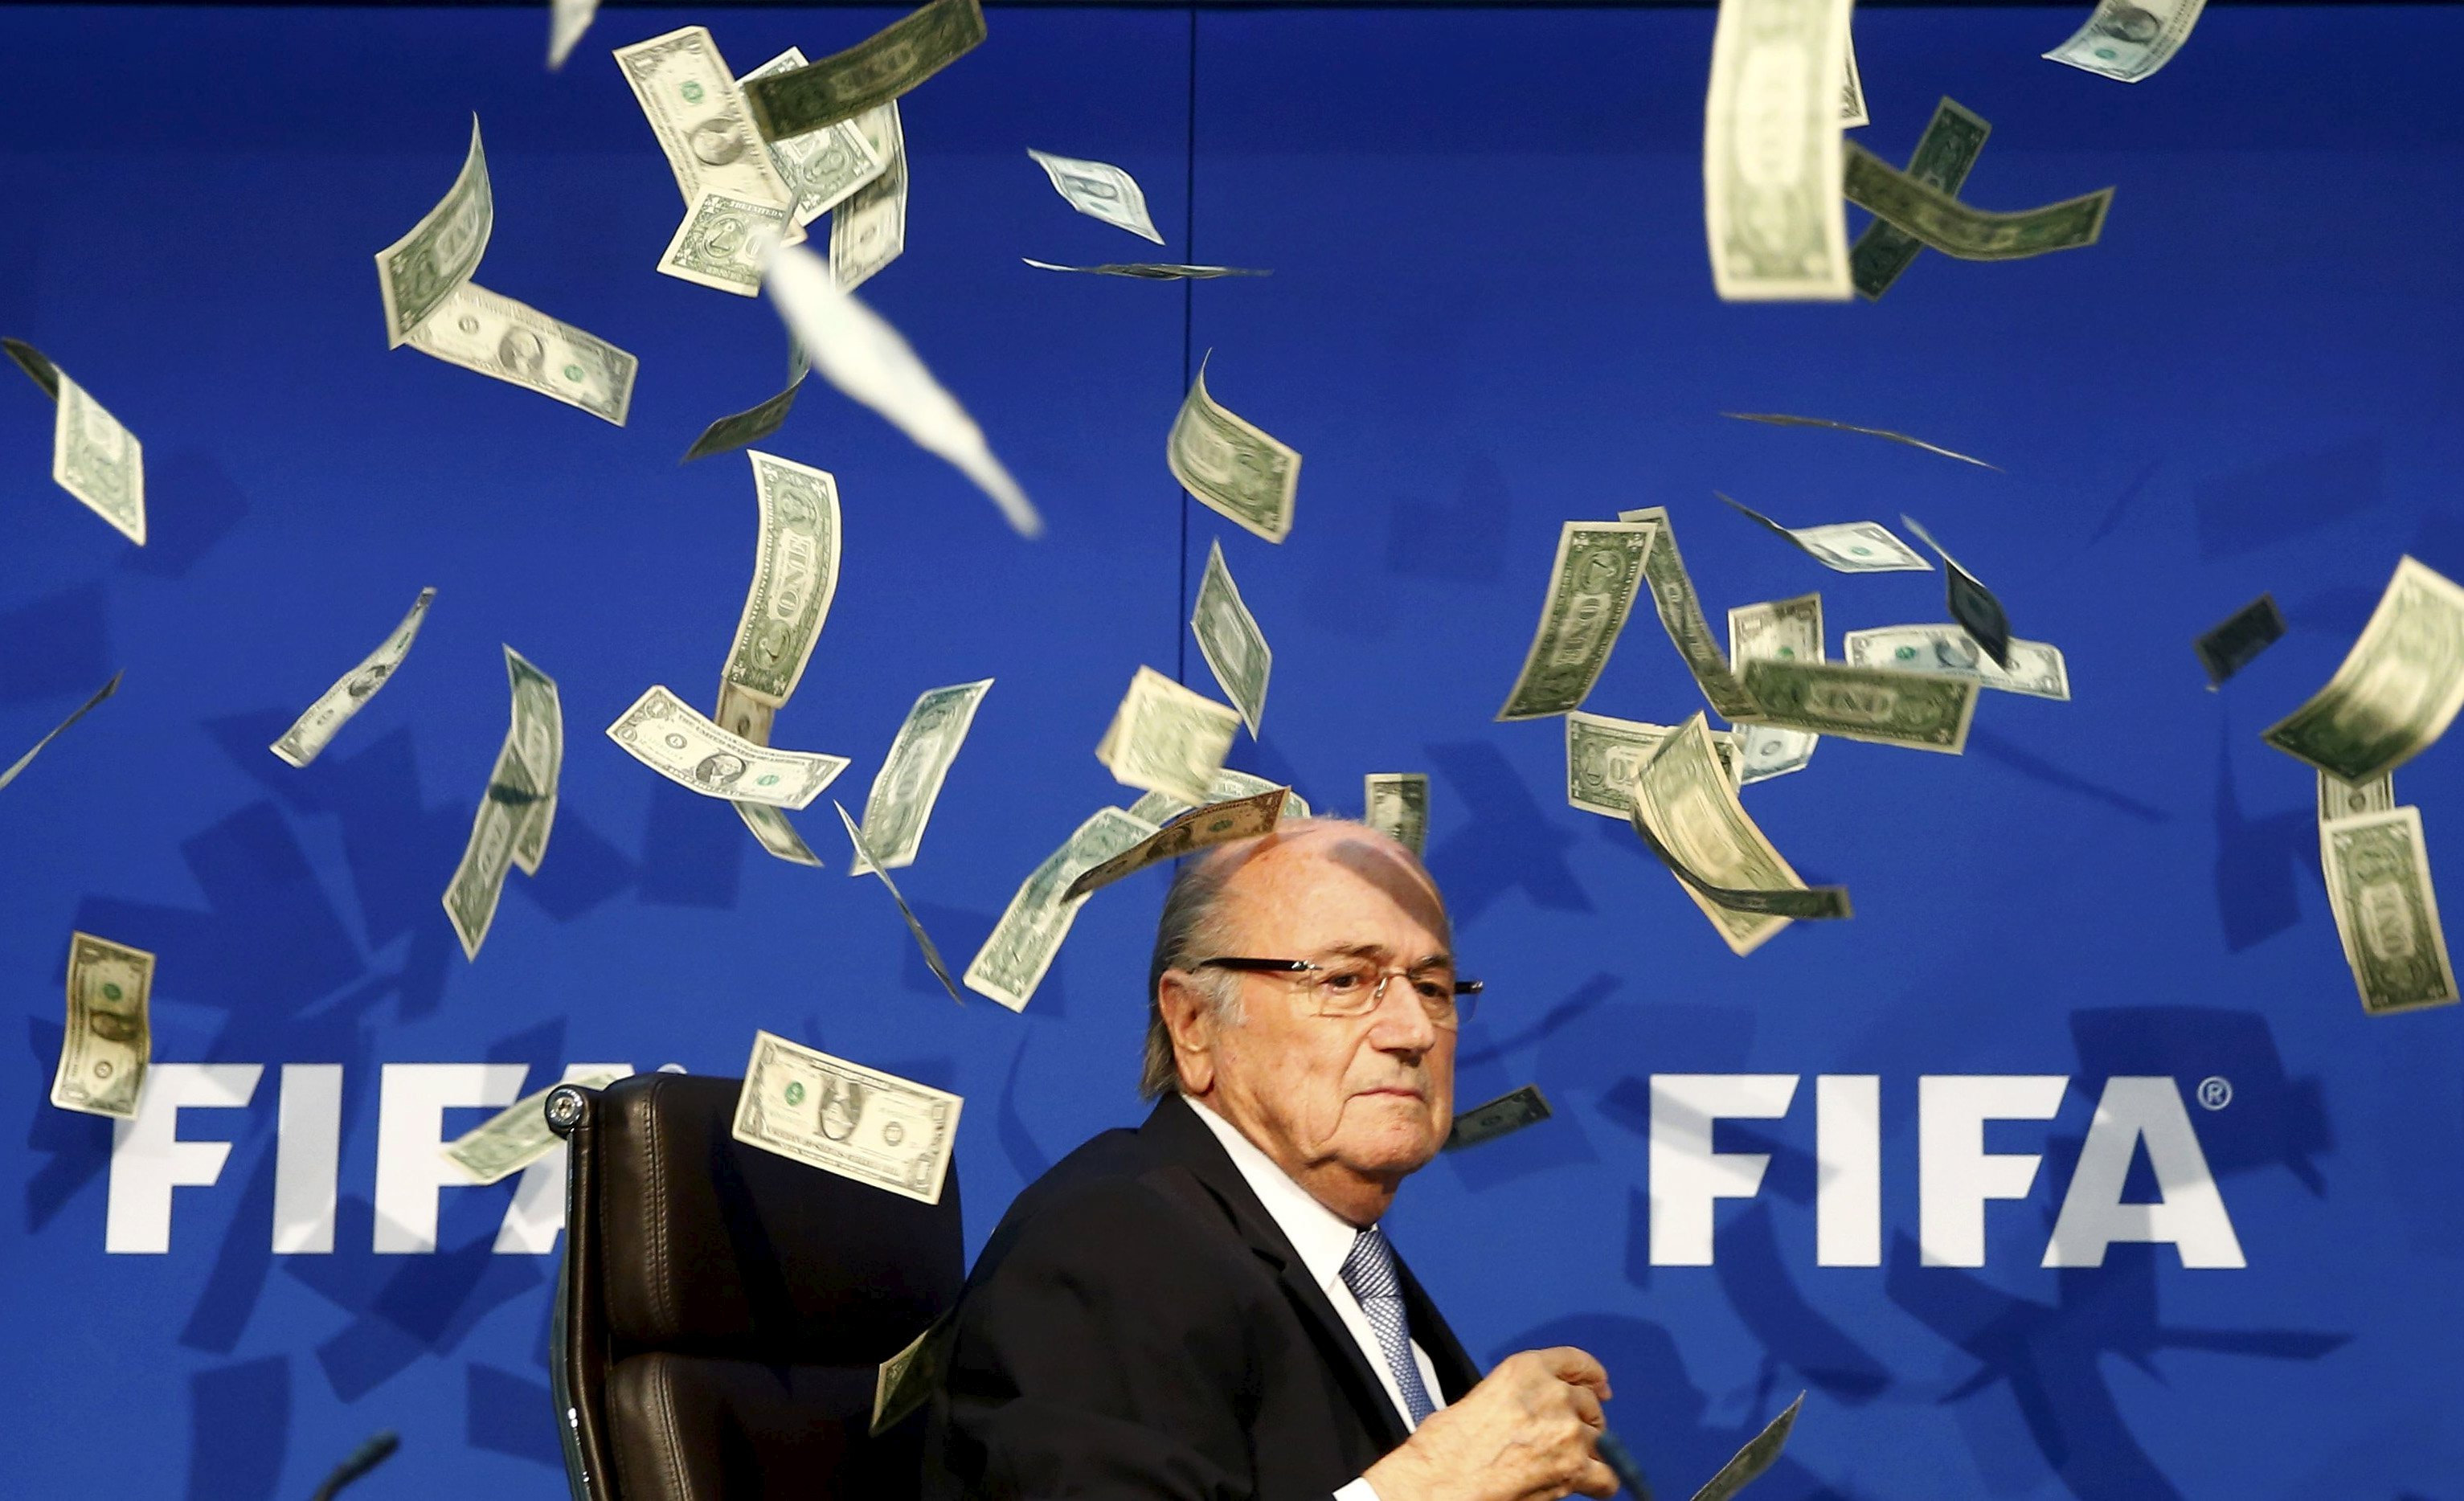 Fifa president Sepp Blatter led a life of luxury as head of soccer’s world governing body. Photo: Reuters